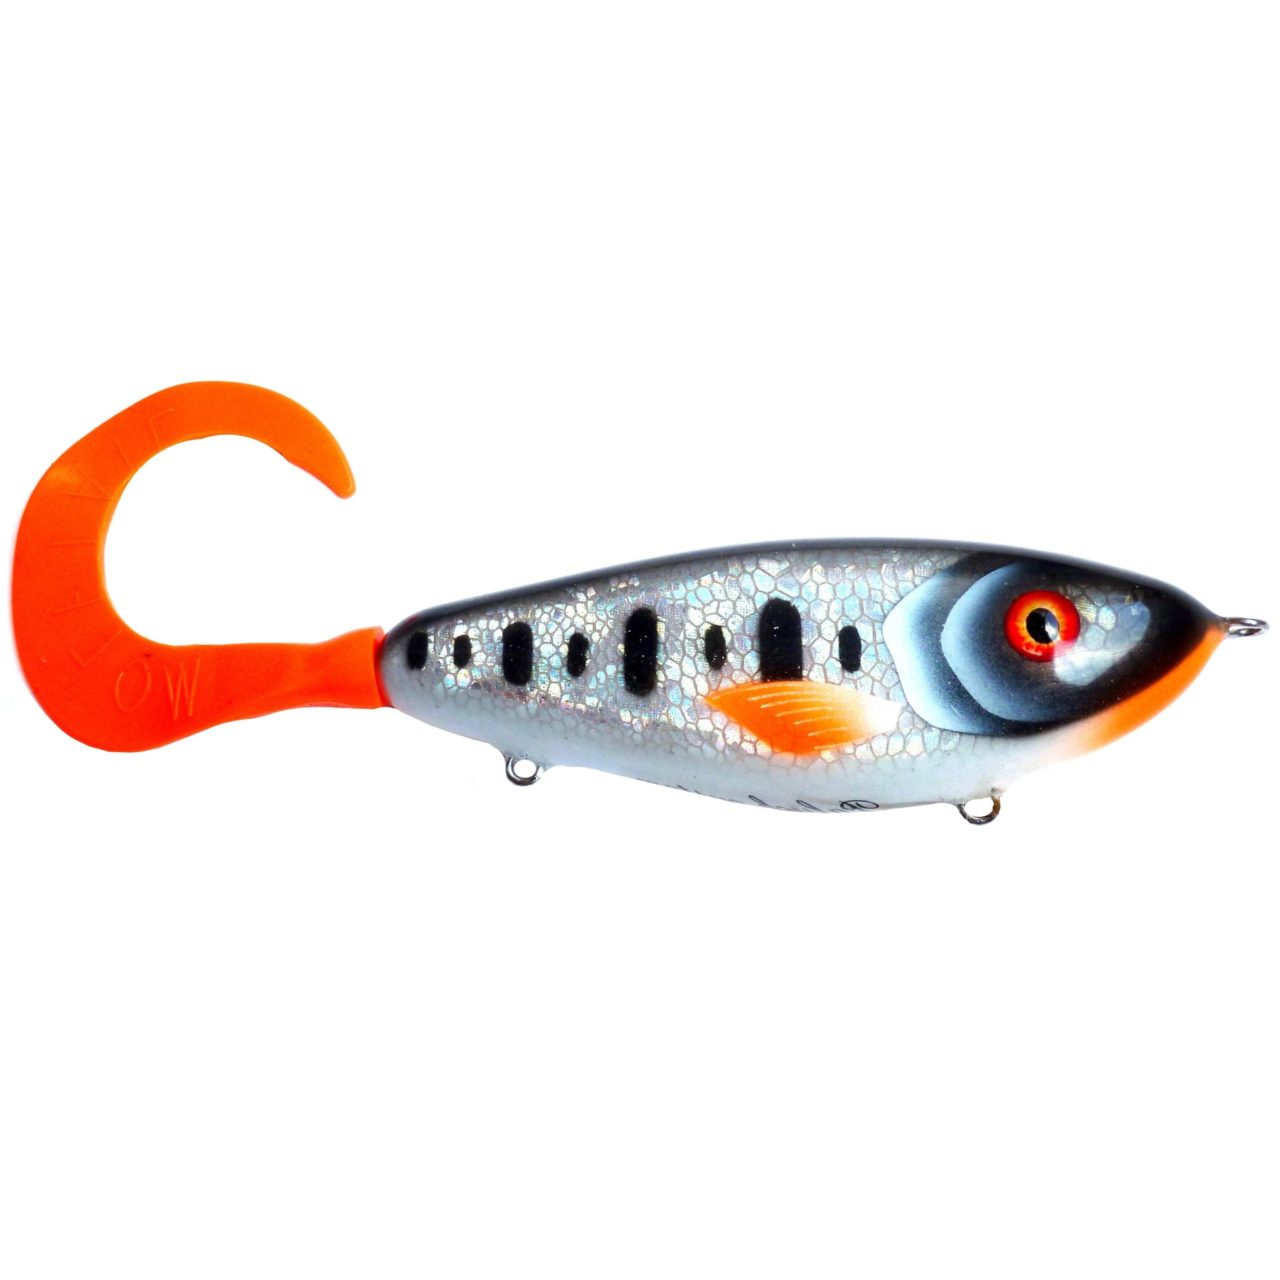 Palych Custom Renegade Petty Perch Tail Silver Foil Spotted